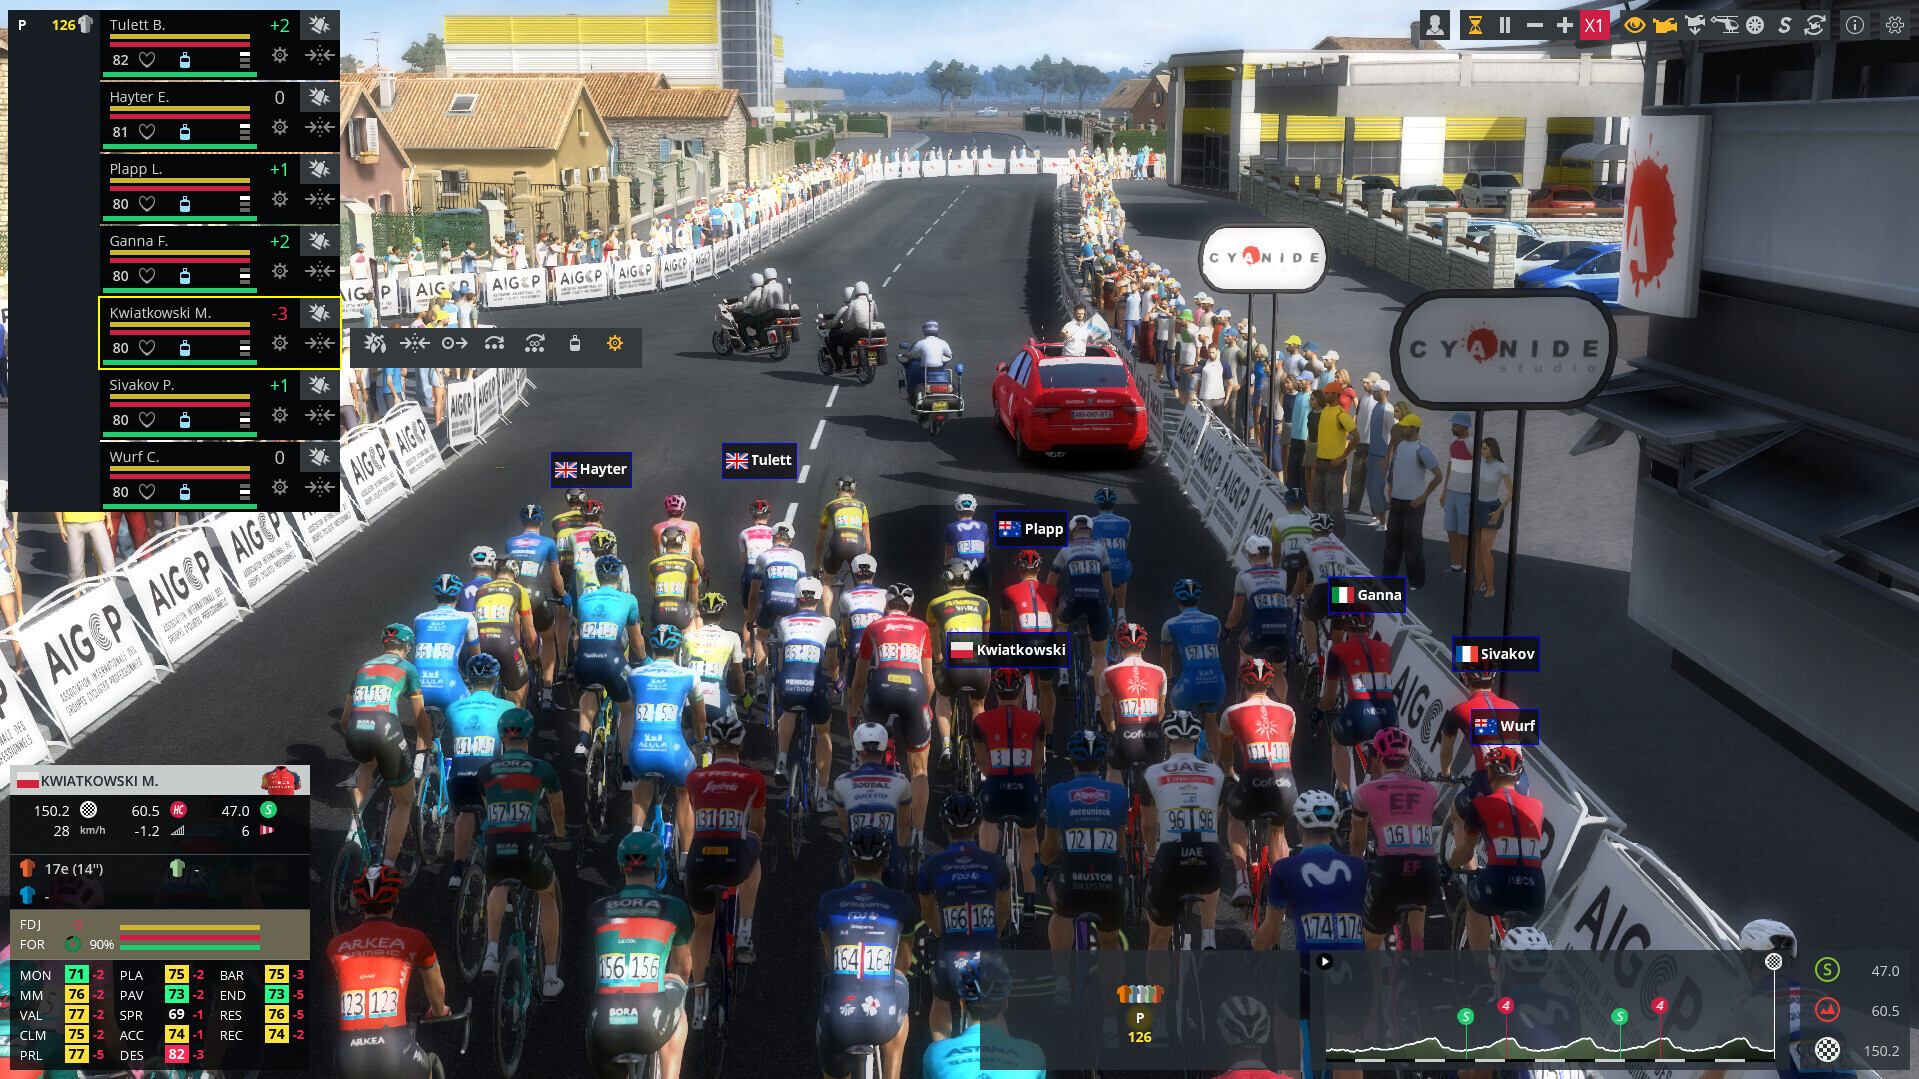 Buy Pro Cycling Manager 2023 CD Key Compare Prices